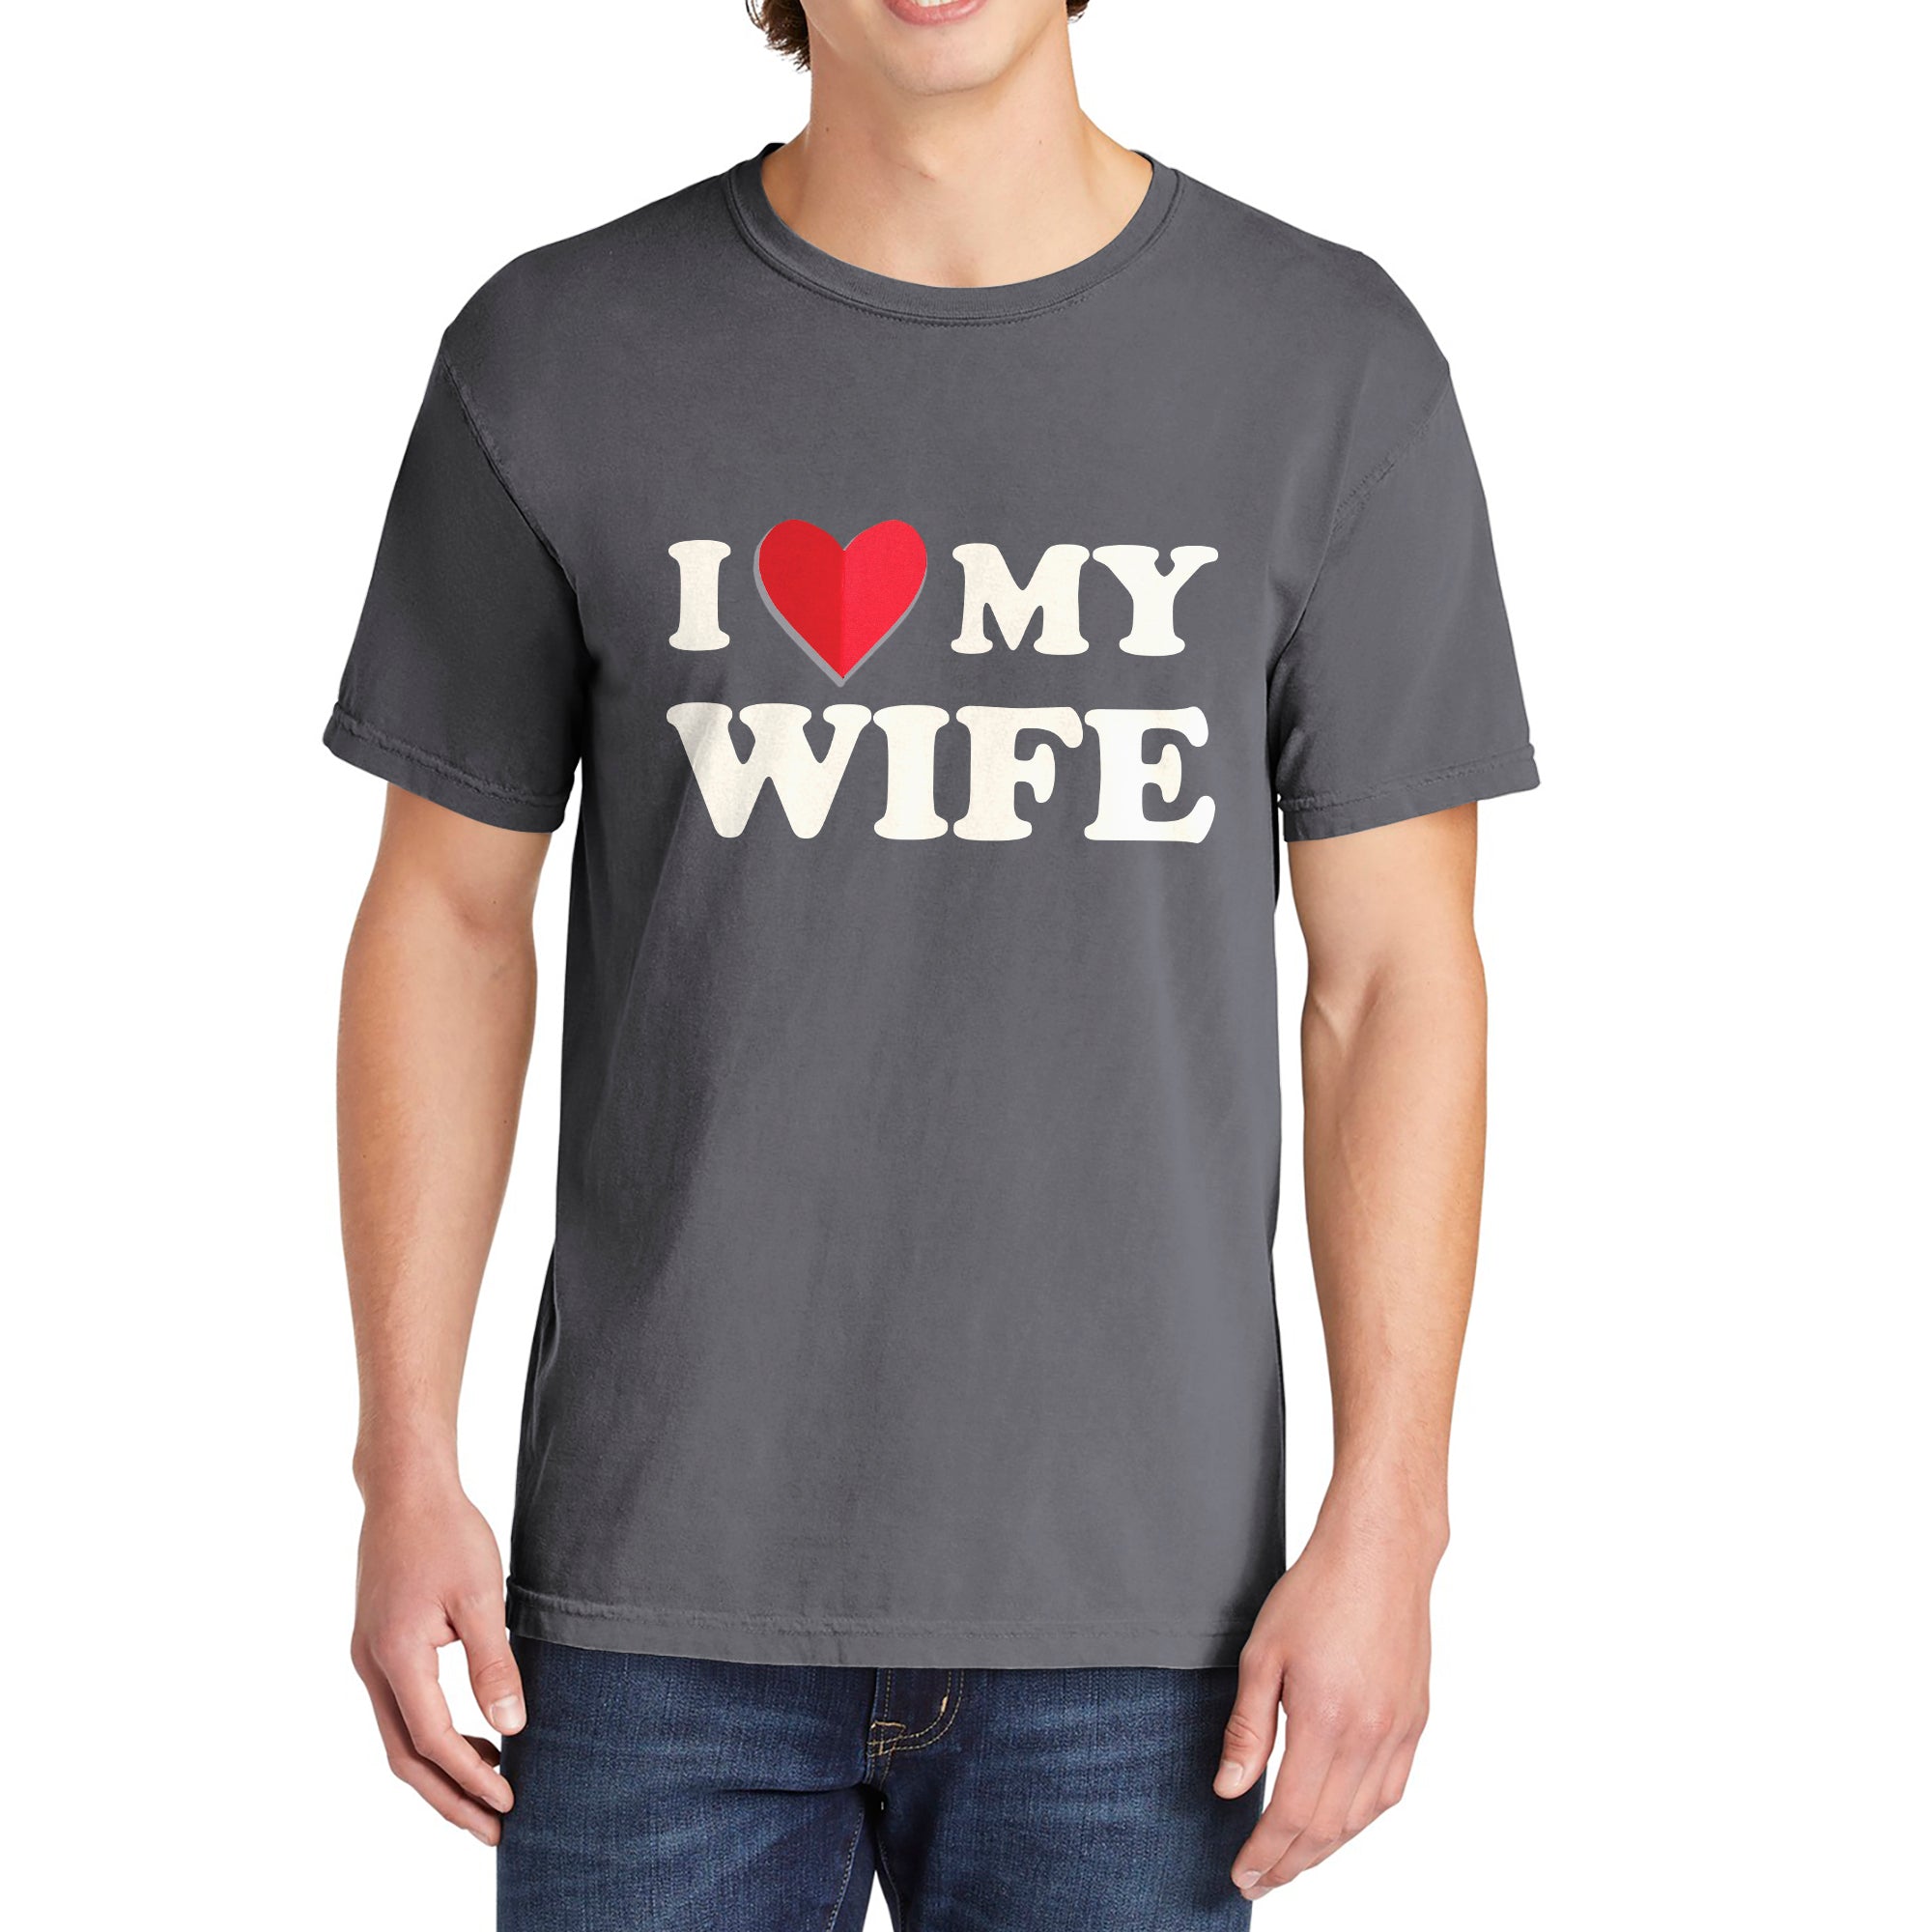 I Love My Wife Shirt Garment-Dyed Tee Graphic T-Shirt